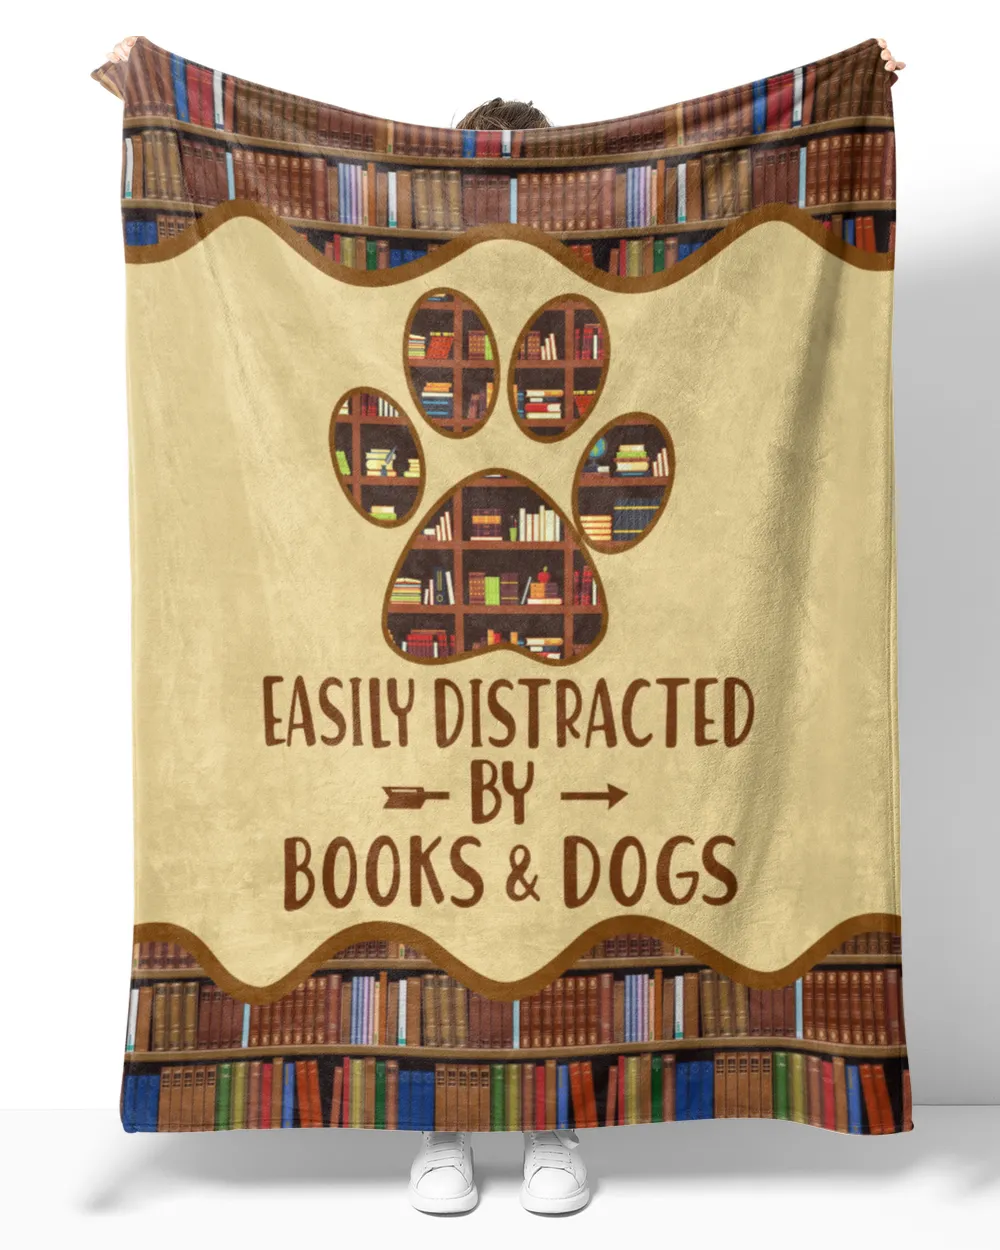 BOOK EASILY DISTRACTED